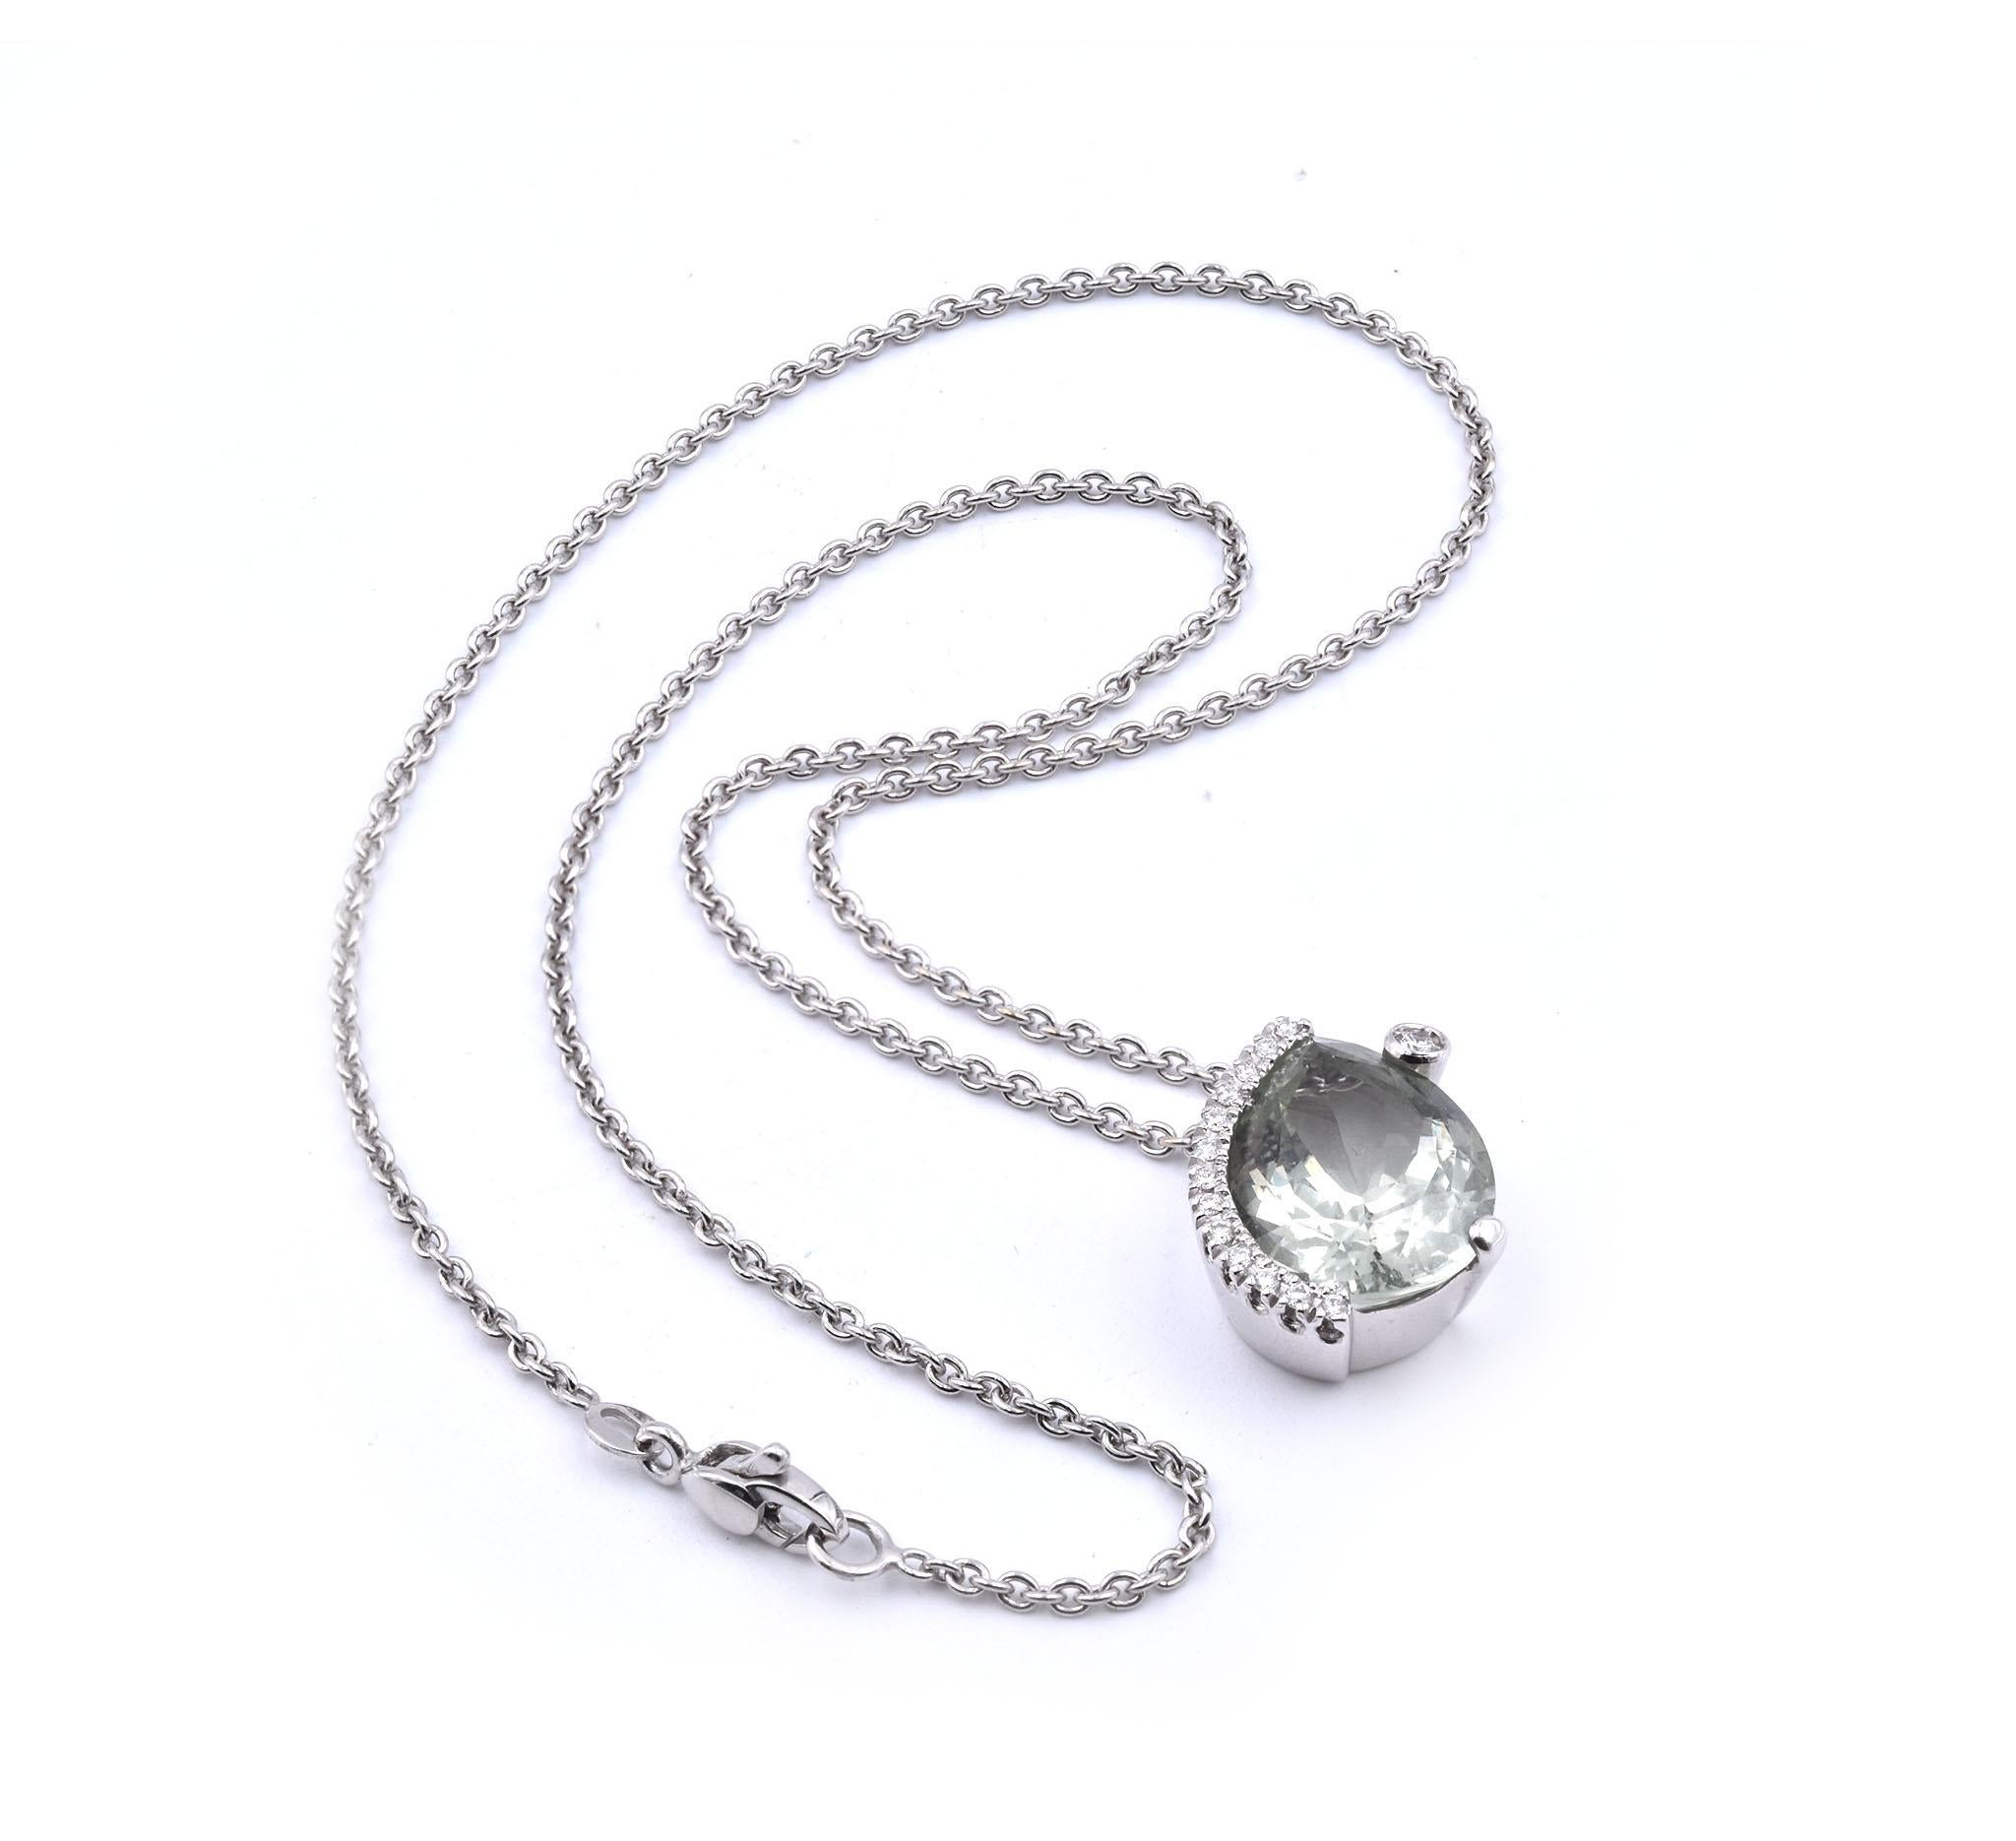 Material: 18k white gold
Diamond: 14 round brilliant cut = .13cttw
Color: H
Clarity: SI1
Prasiolite: 1 pear cut = 6.60ct
Dimensions: necklace is 16-inches in length, pendant measure 18.61mm x 15.6mm
Weight: 11.02 grams
